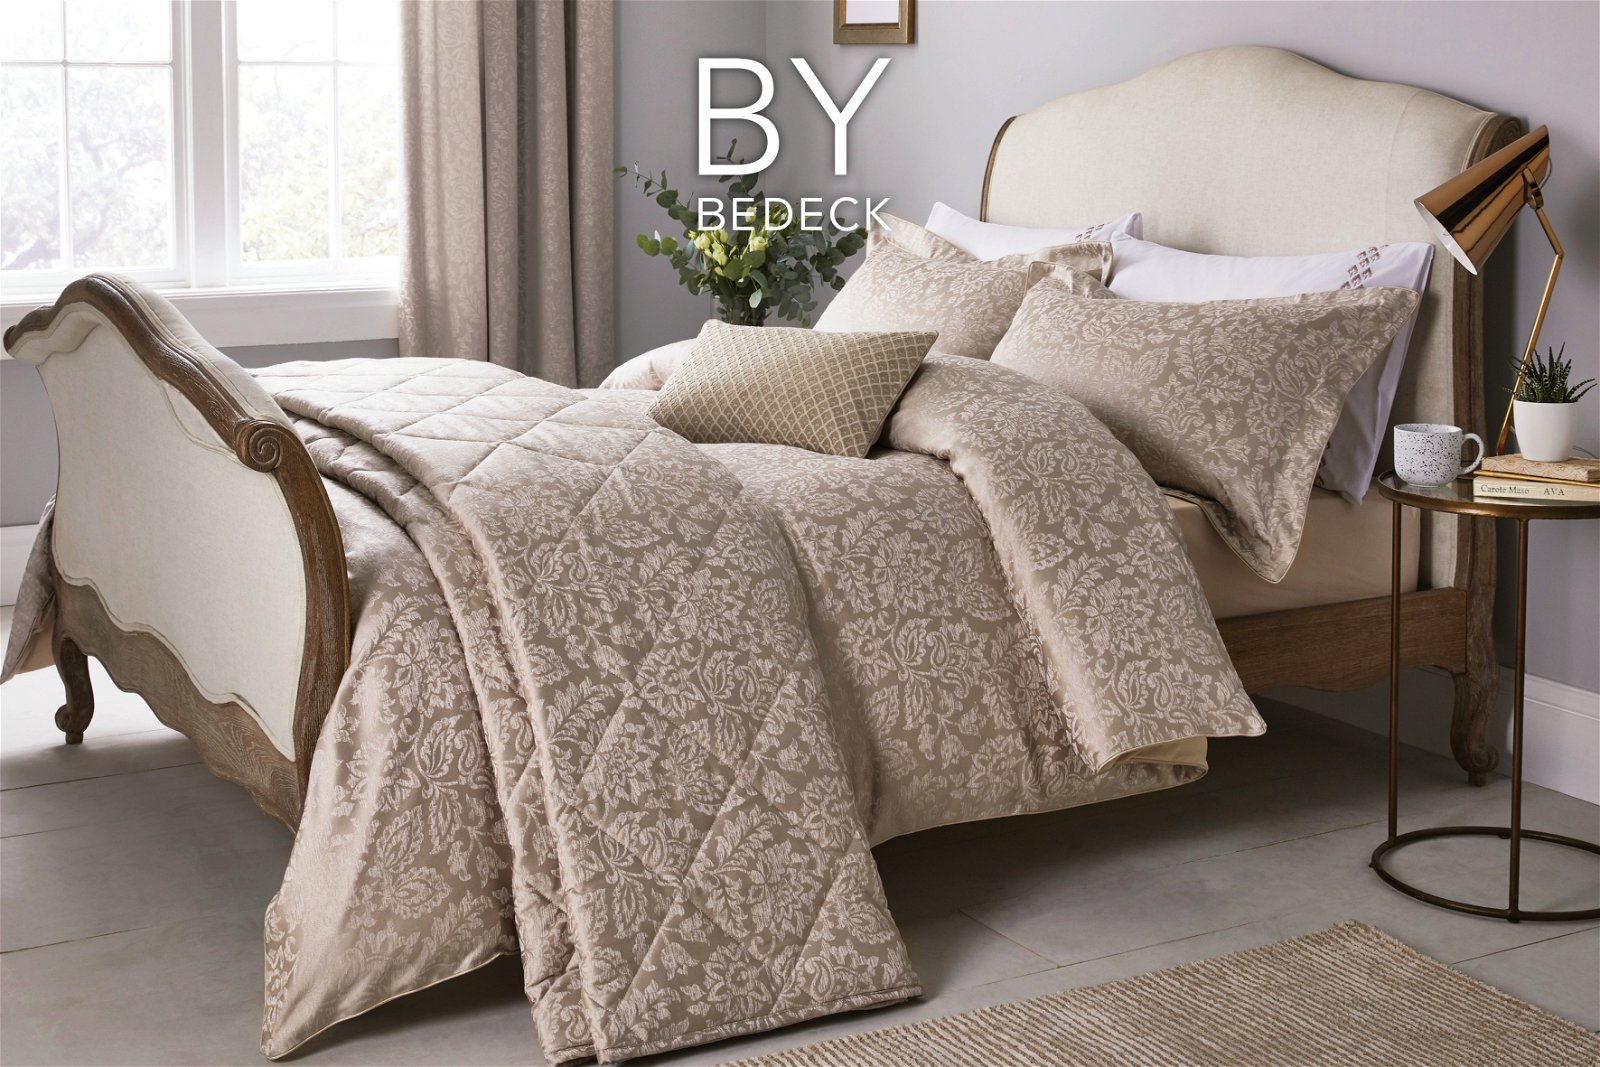 By Bedeck Lina Bedding in Linen